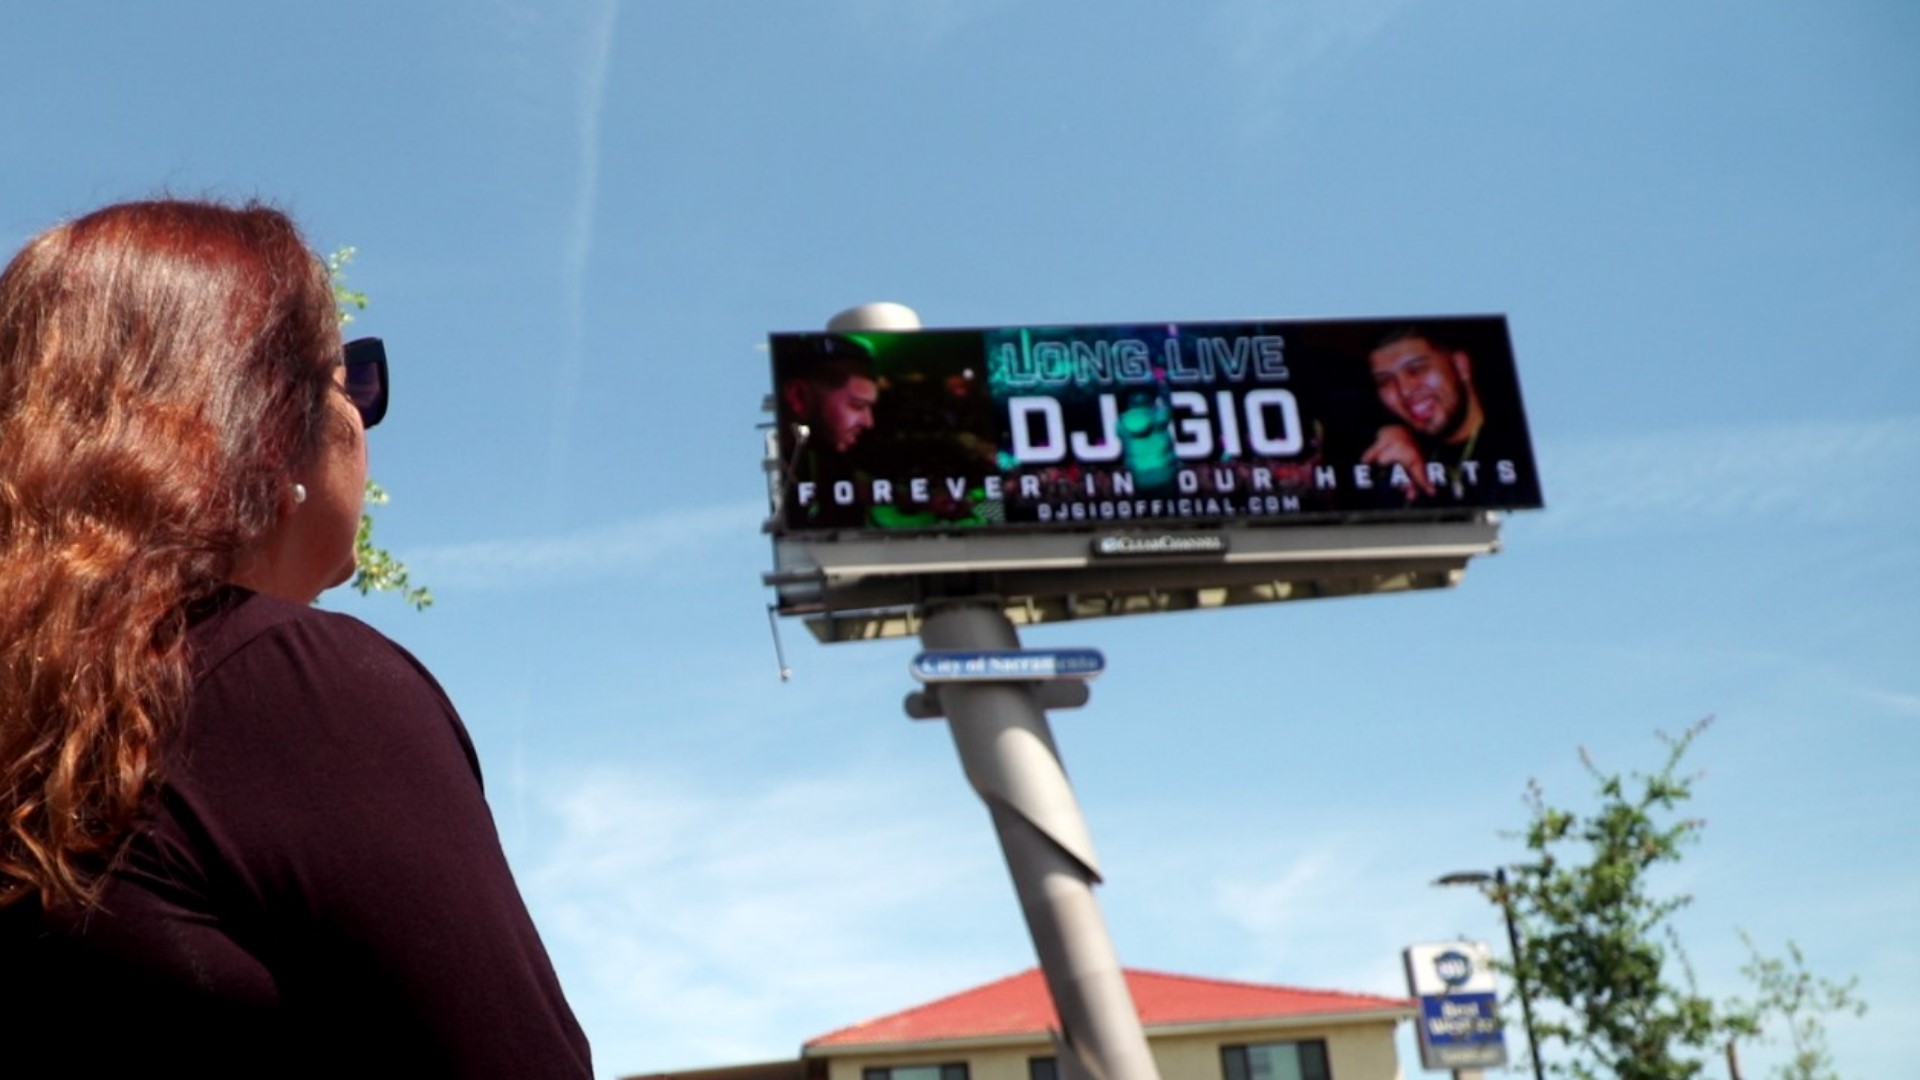 The billboard shows DJ Gio smiling and performing in front of a large crowd with the words "Long Live DJ Gio" and "Forever in our hearts."